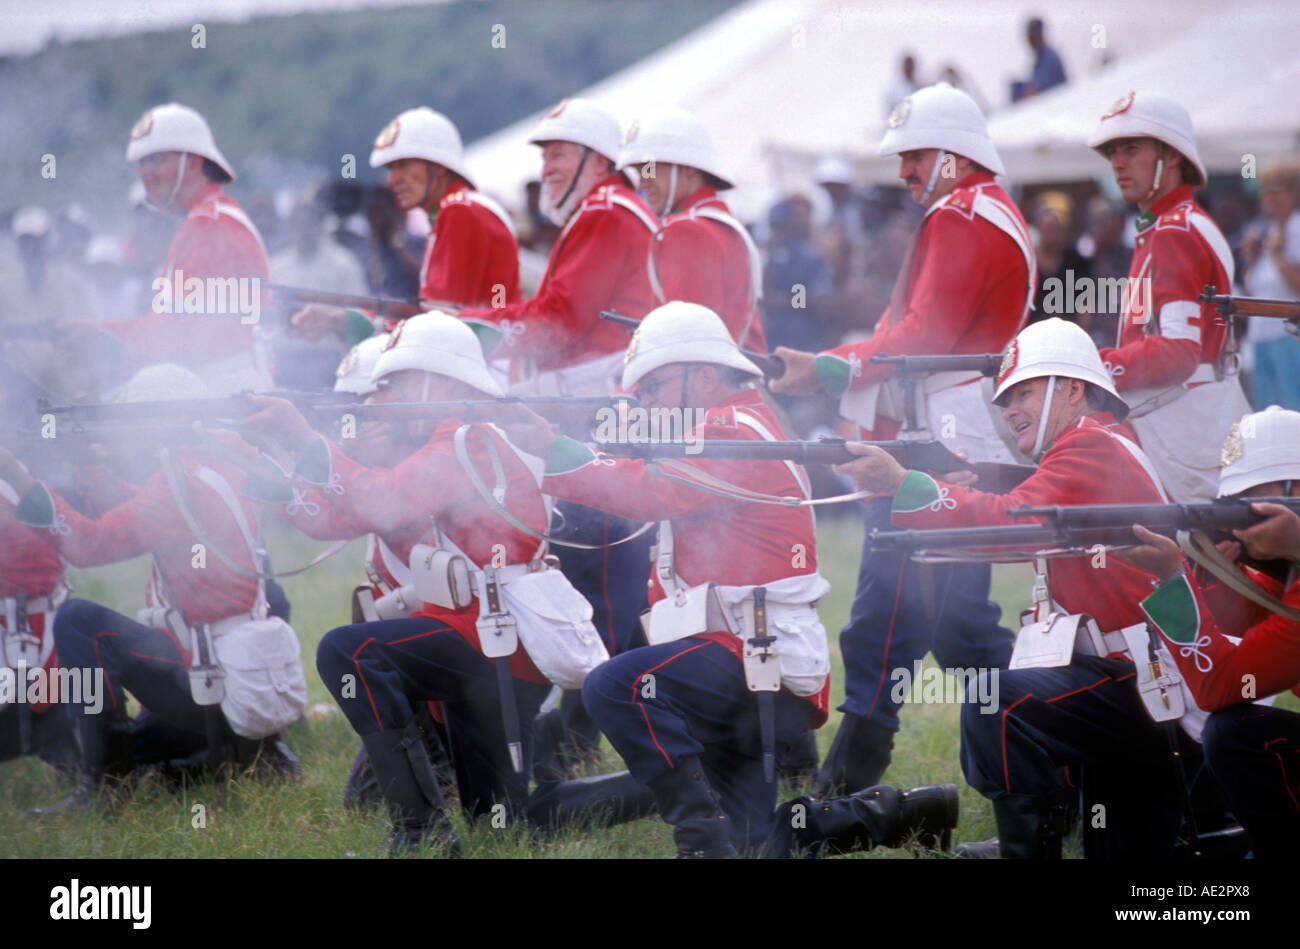 South Africa Kwa Zulu Natal Isandlwana The Red coat soldiers open fire Stock Photo